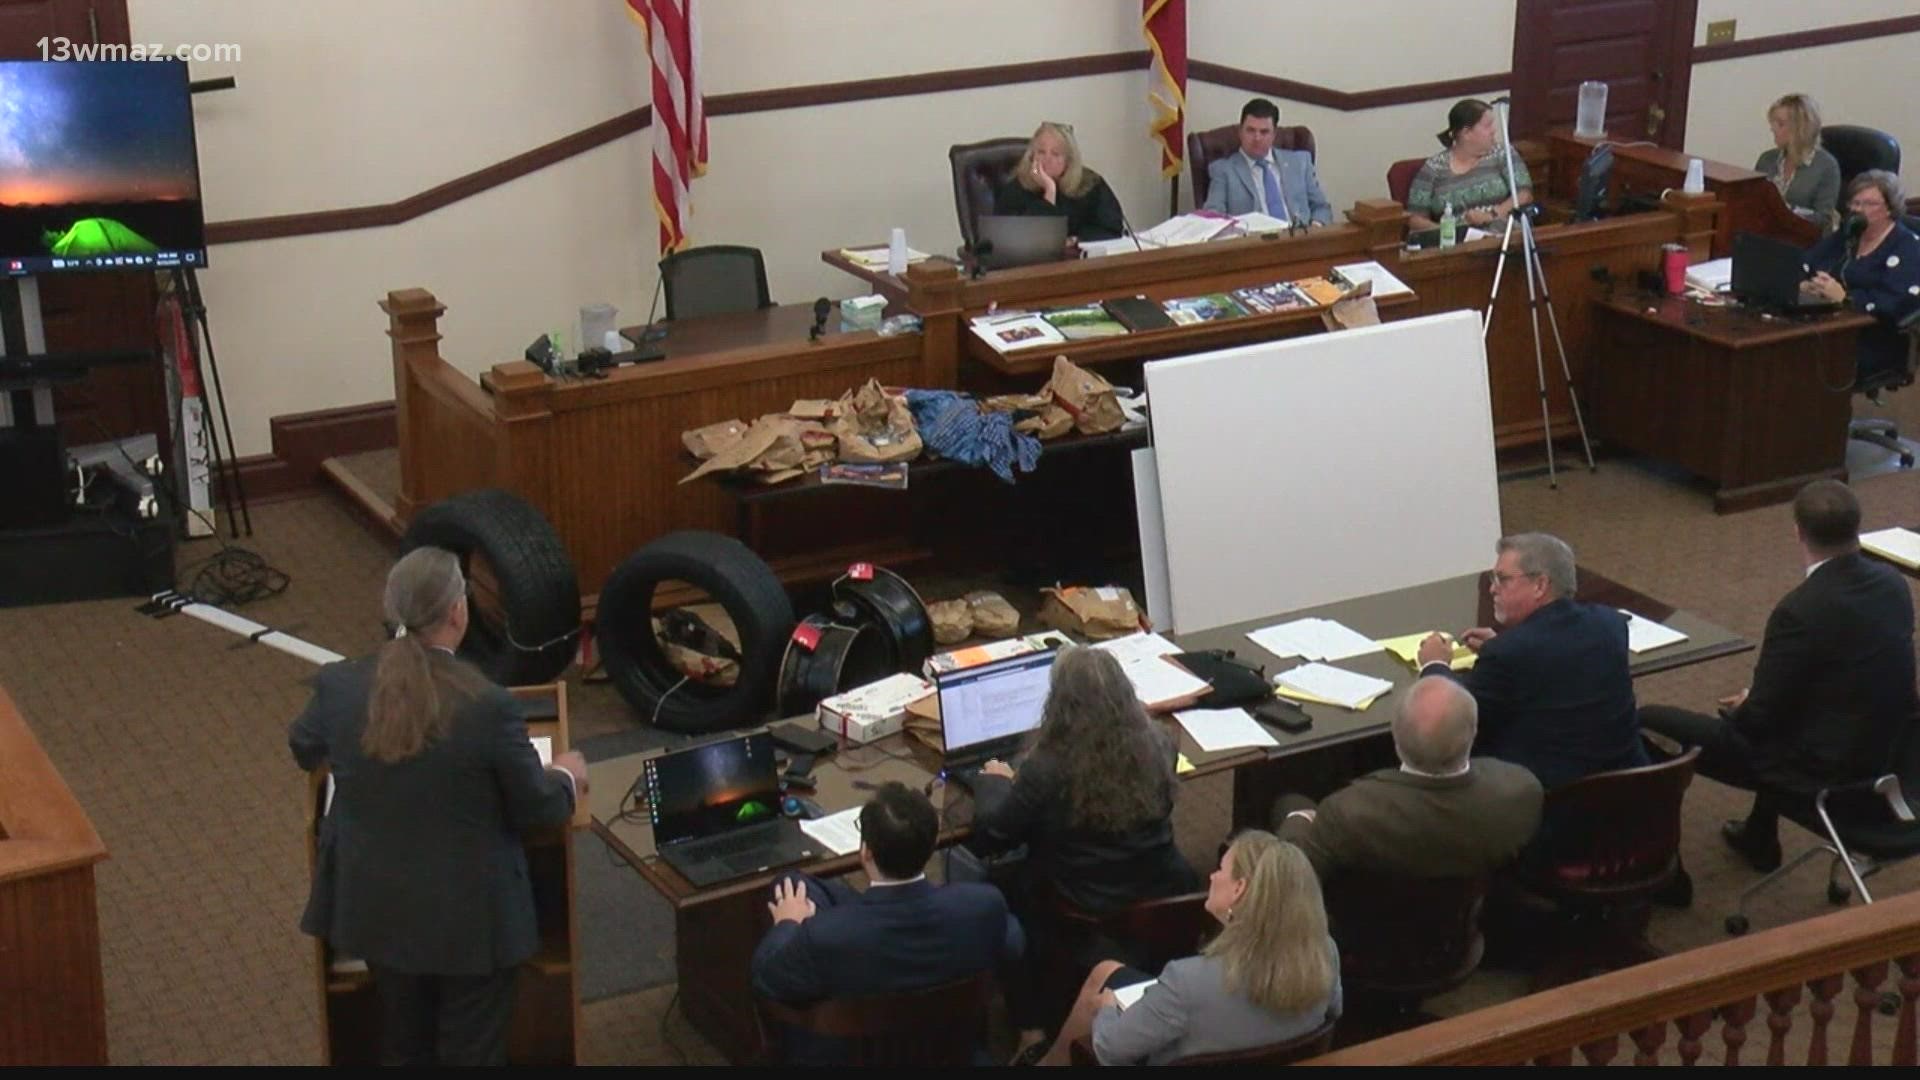 The fate of Donnie Rowe is now in the jury's hands after both sides presented closing arguments.